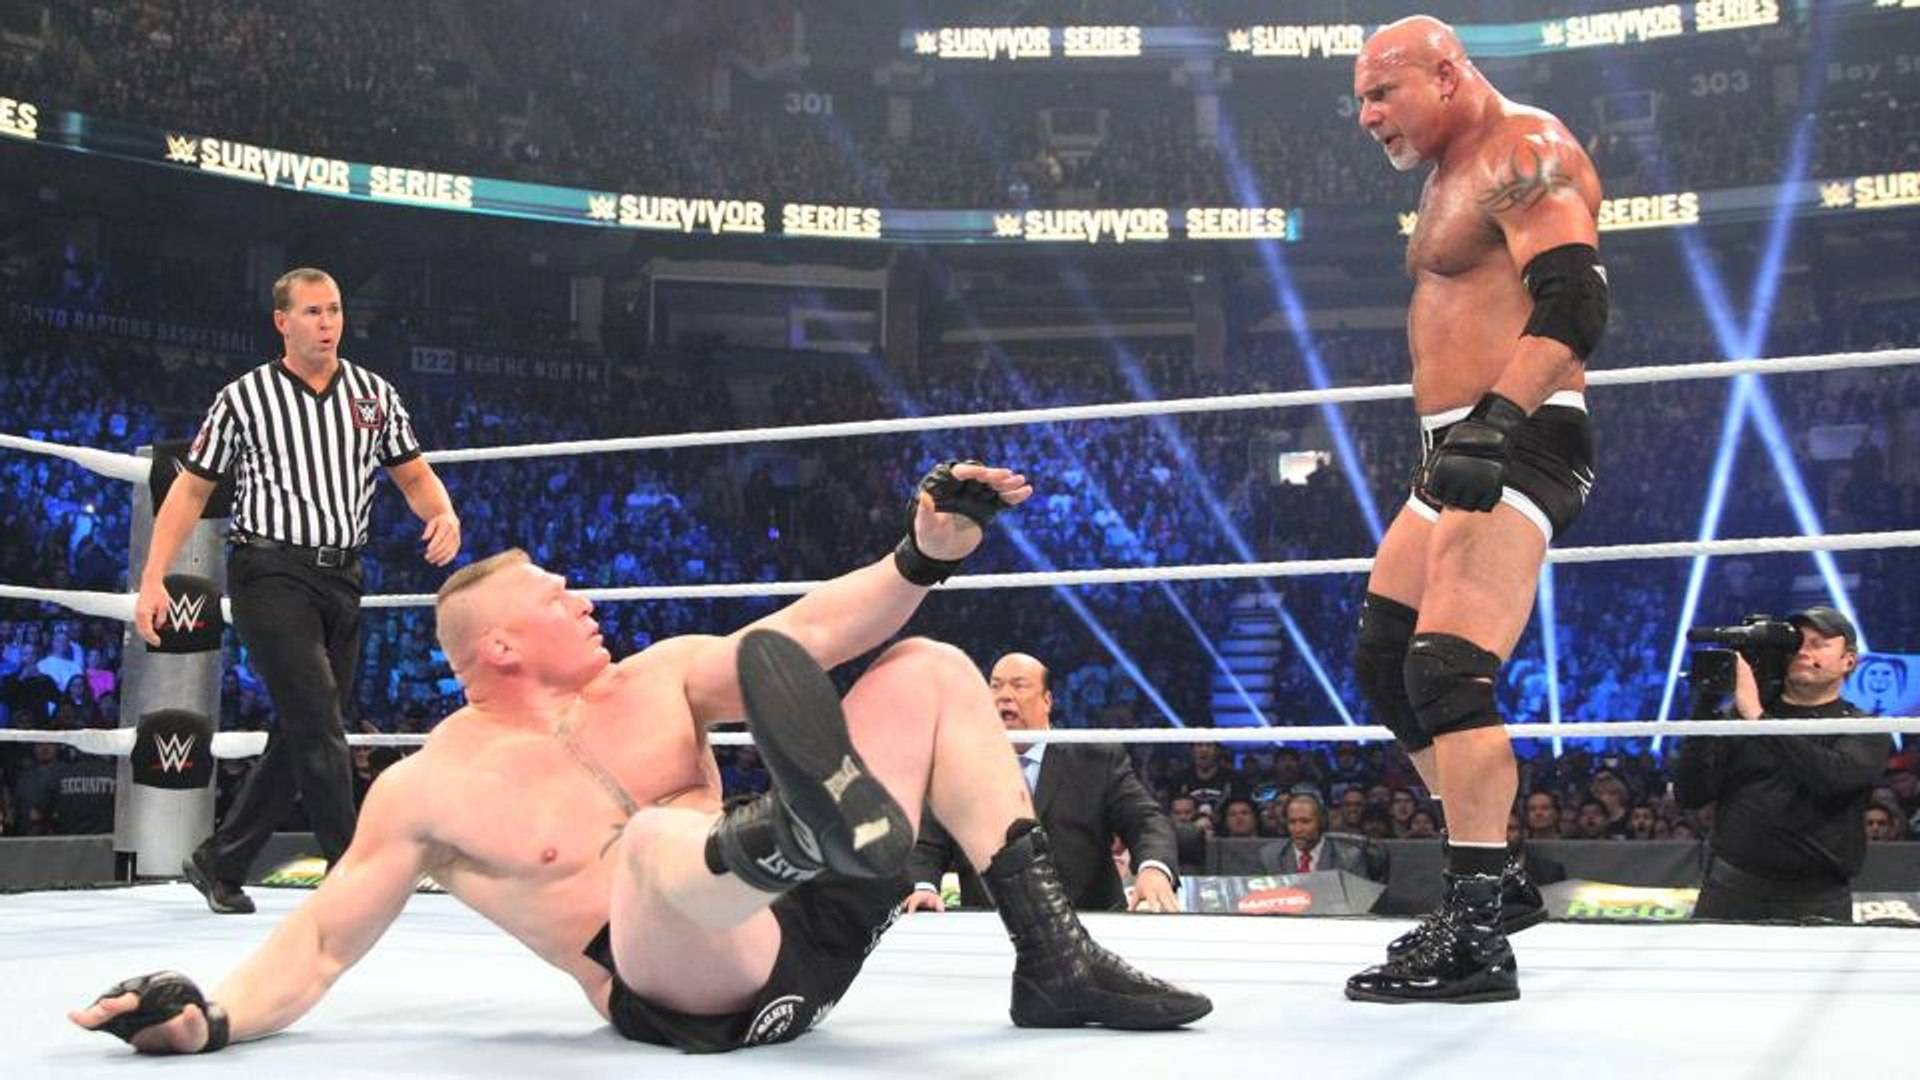 Brock Lesnar came up with the idea to get squashed by Goldberg